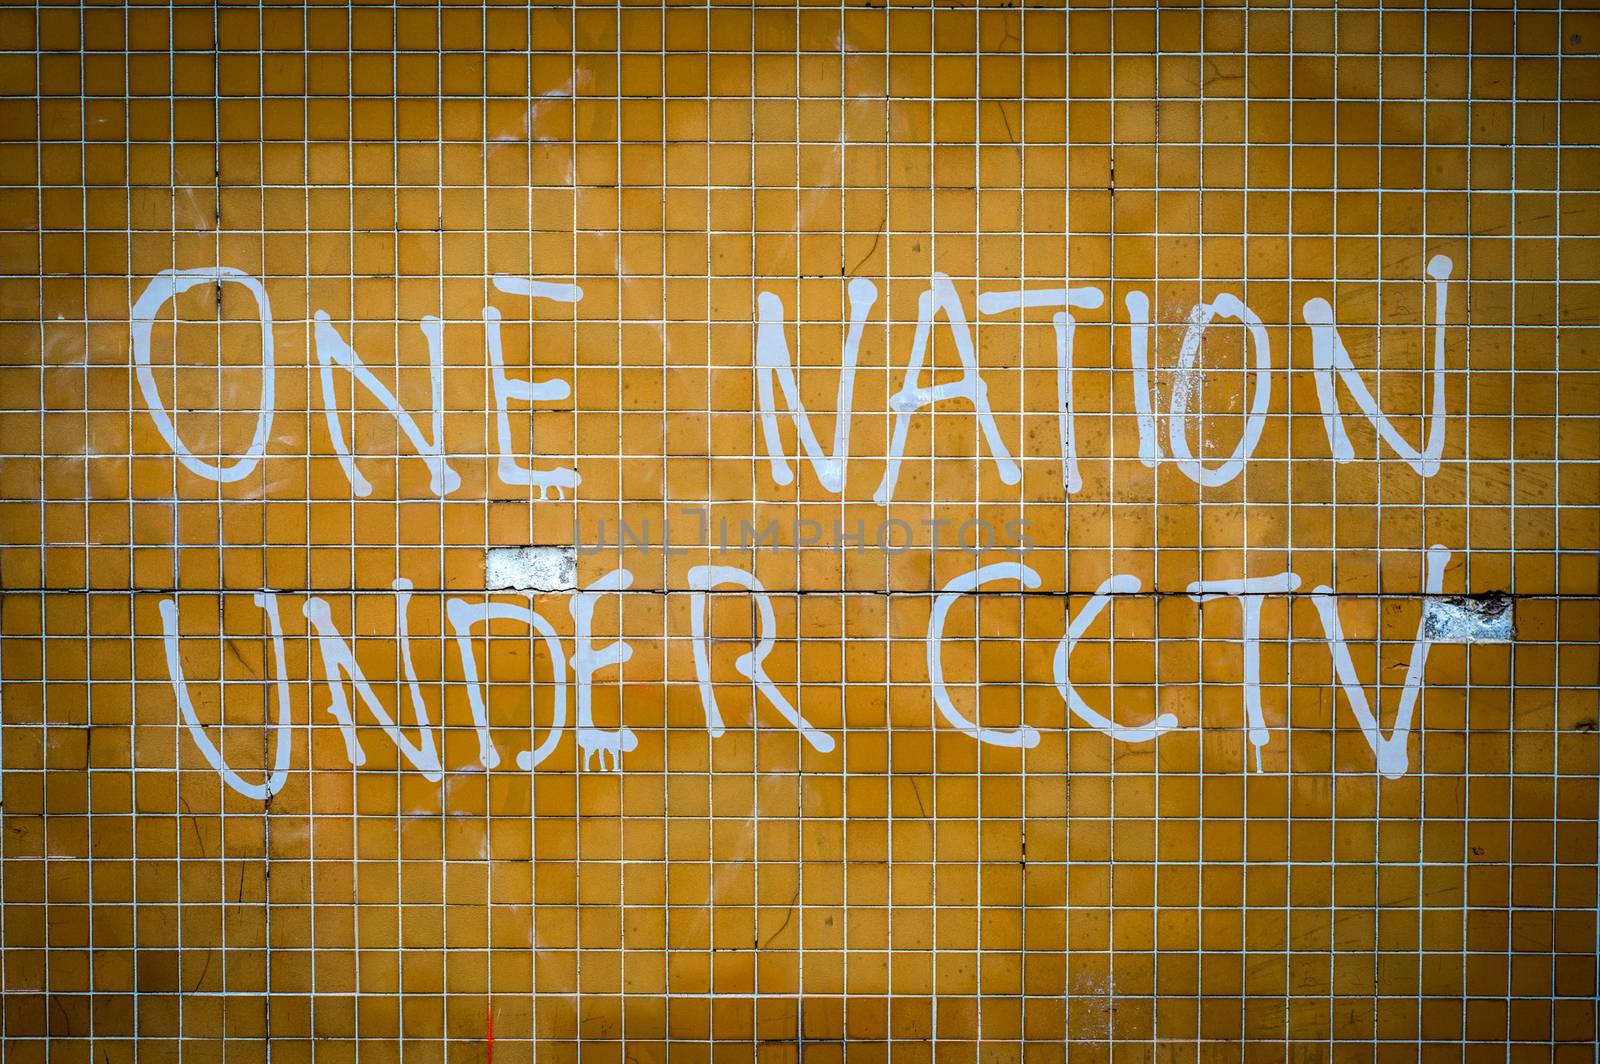 Grungy Graffiti On A Wall In The UK Saying One Nation Under CCTV